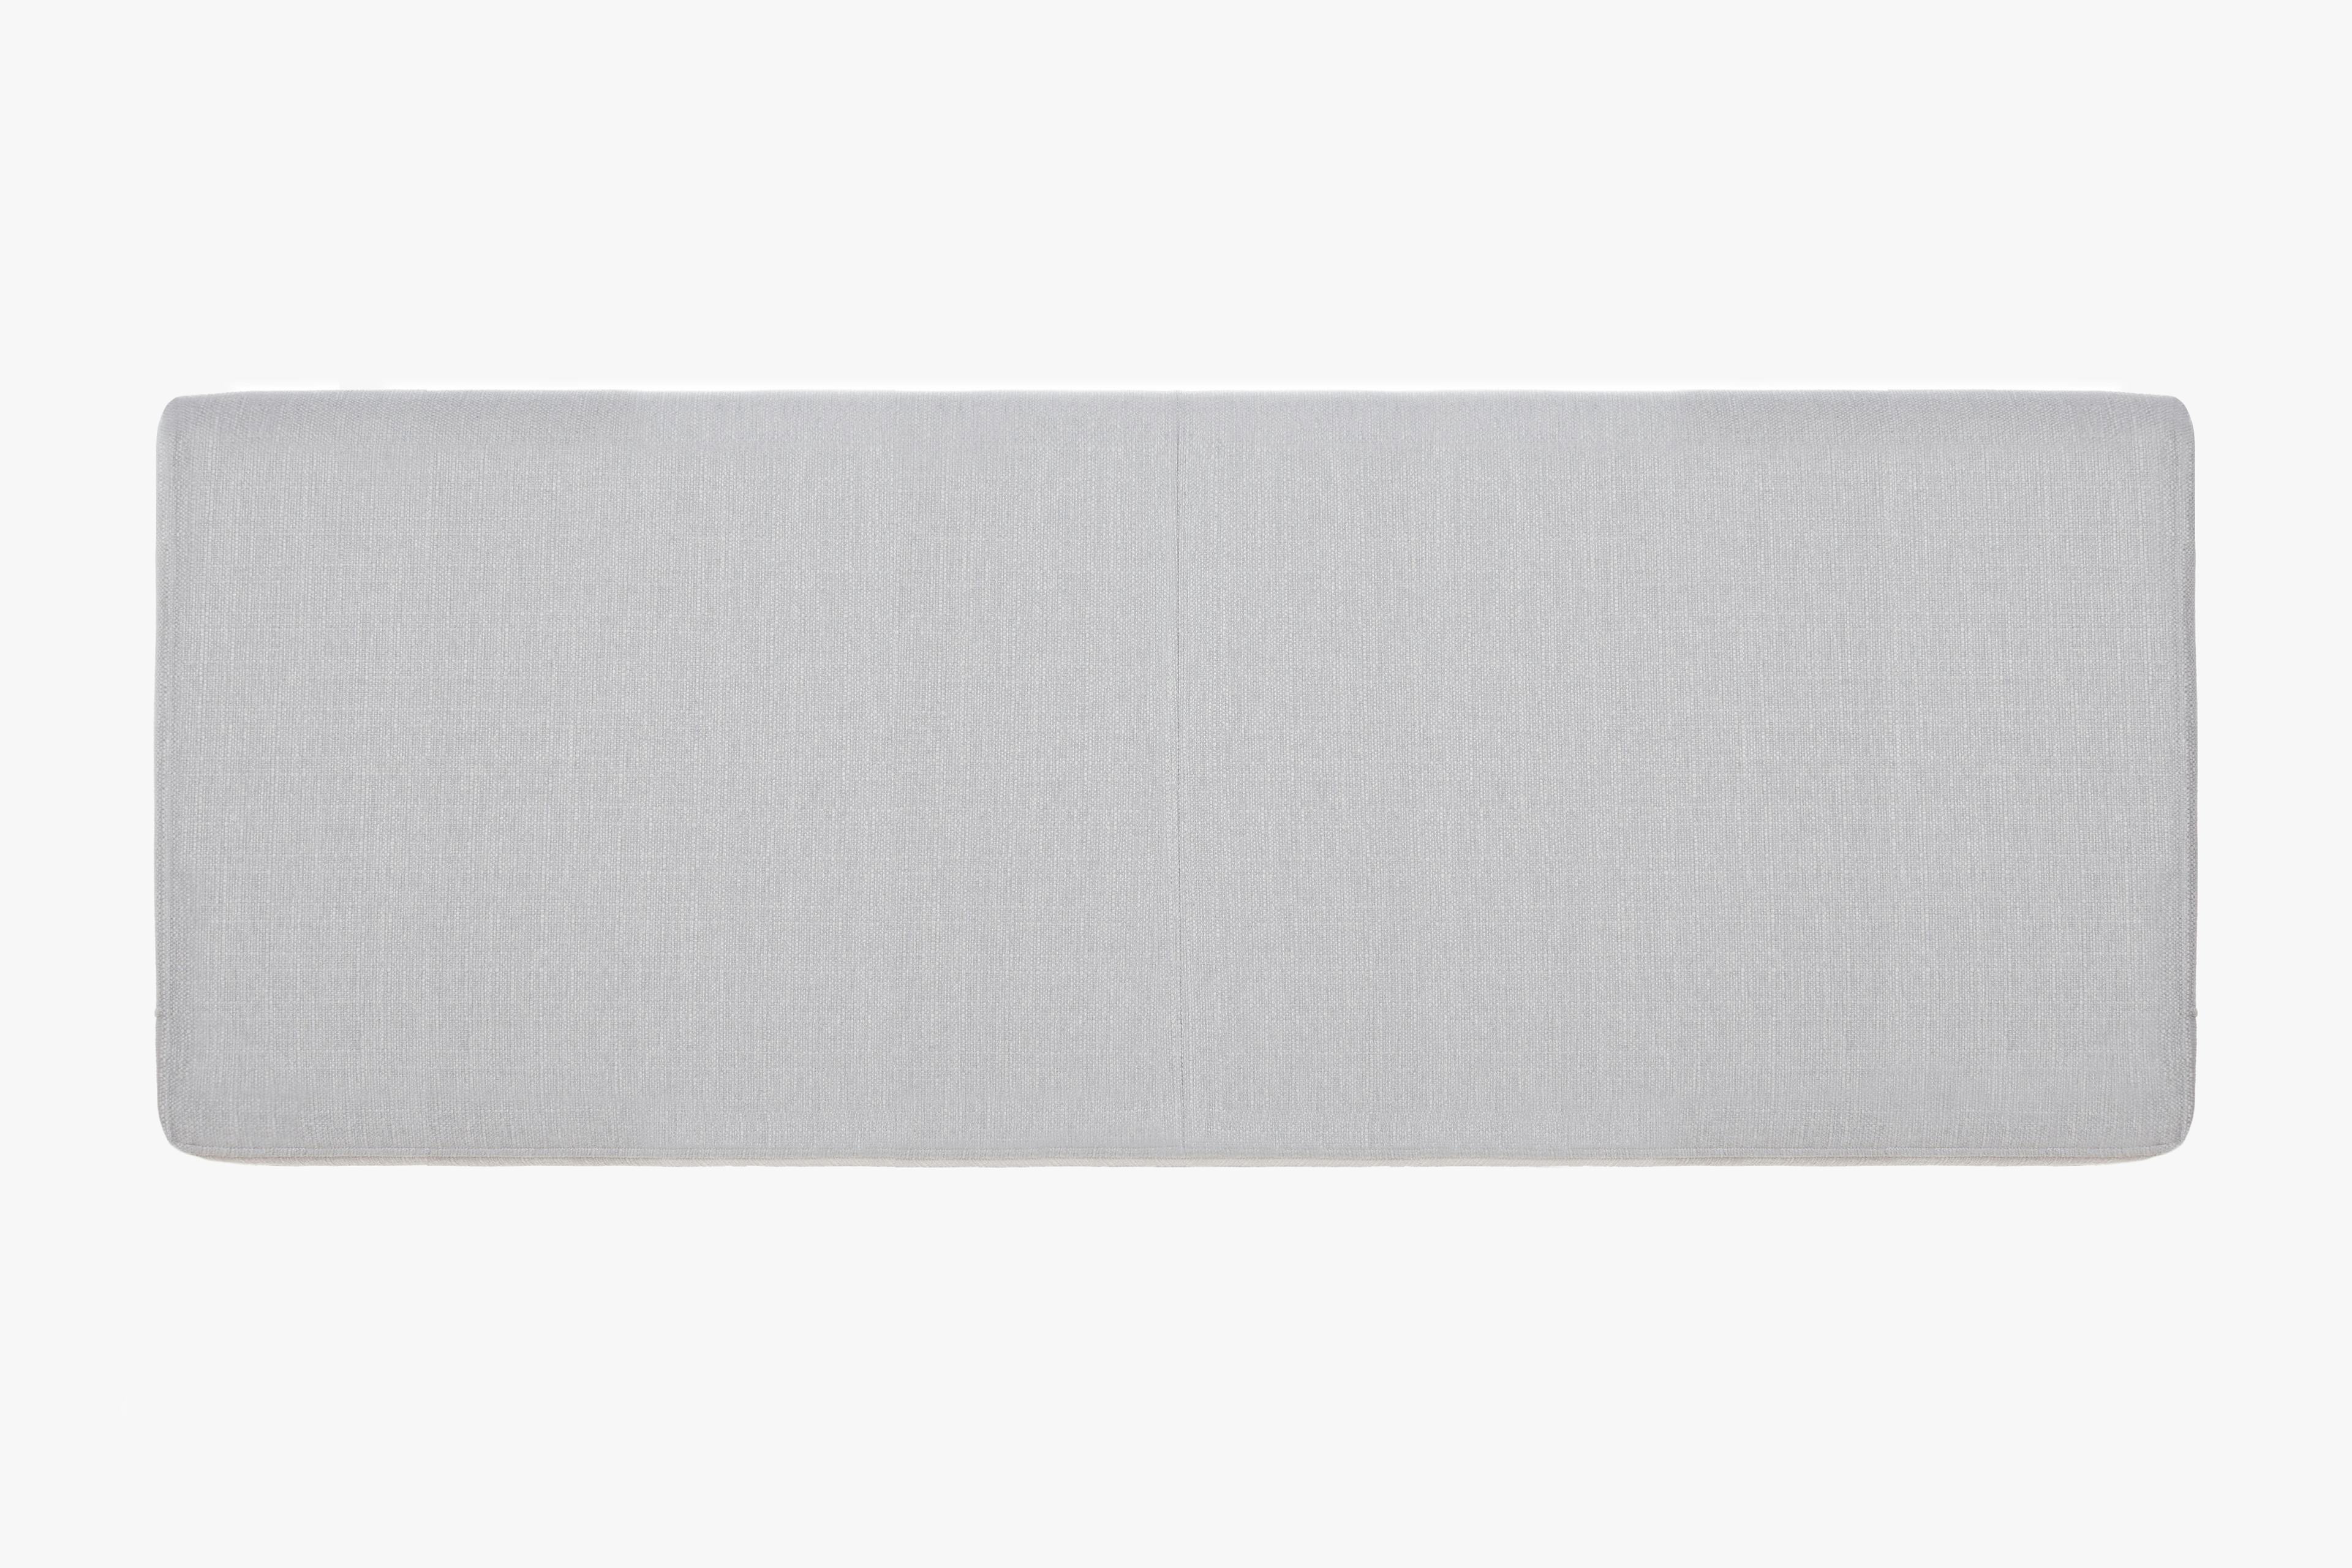 The PillowBoard (Fog Grey) - Front - 3:2